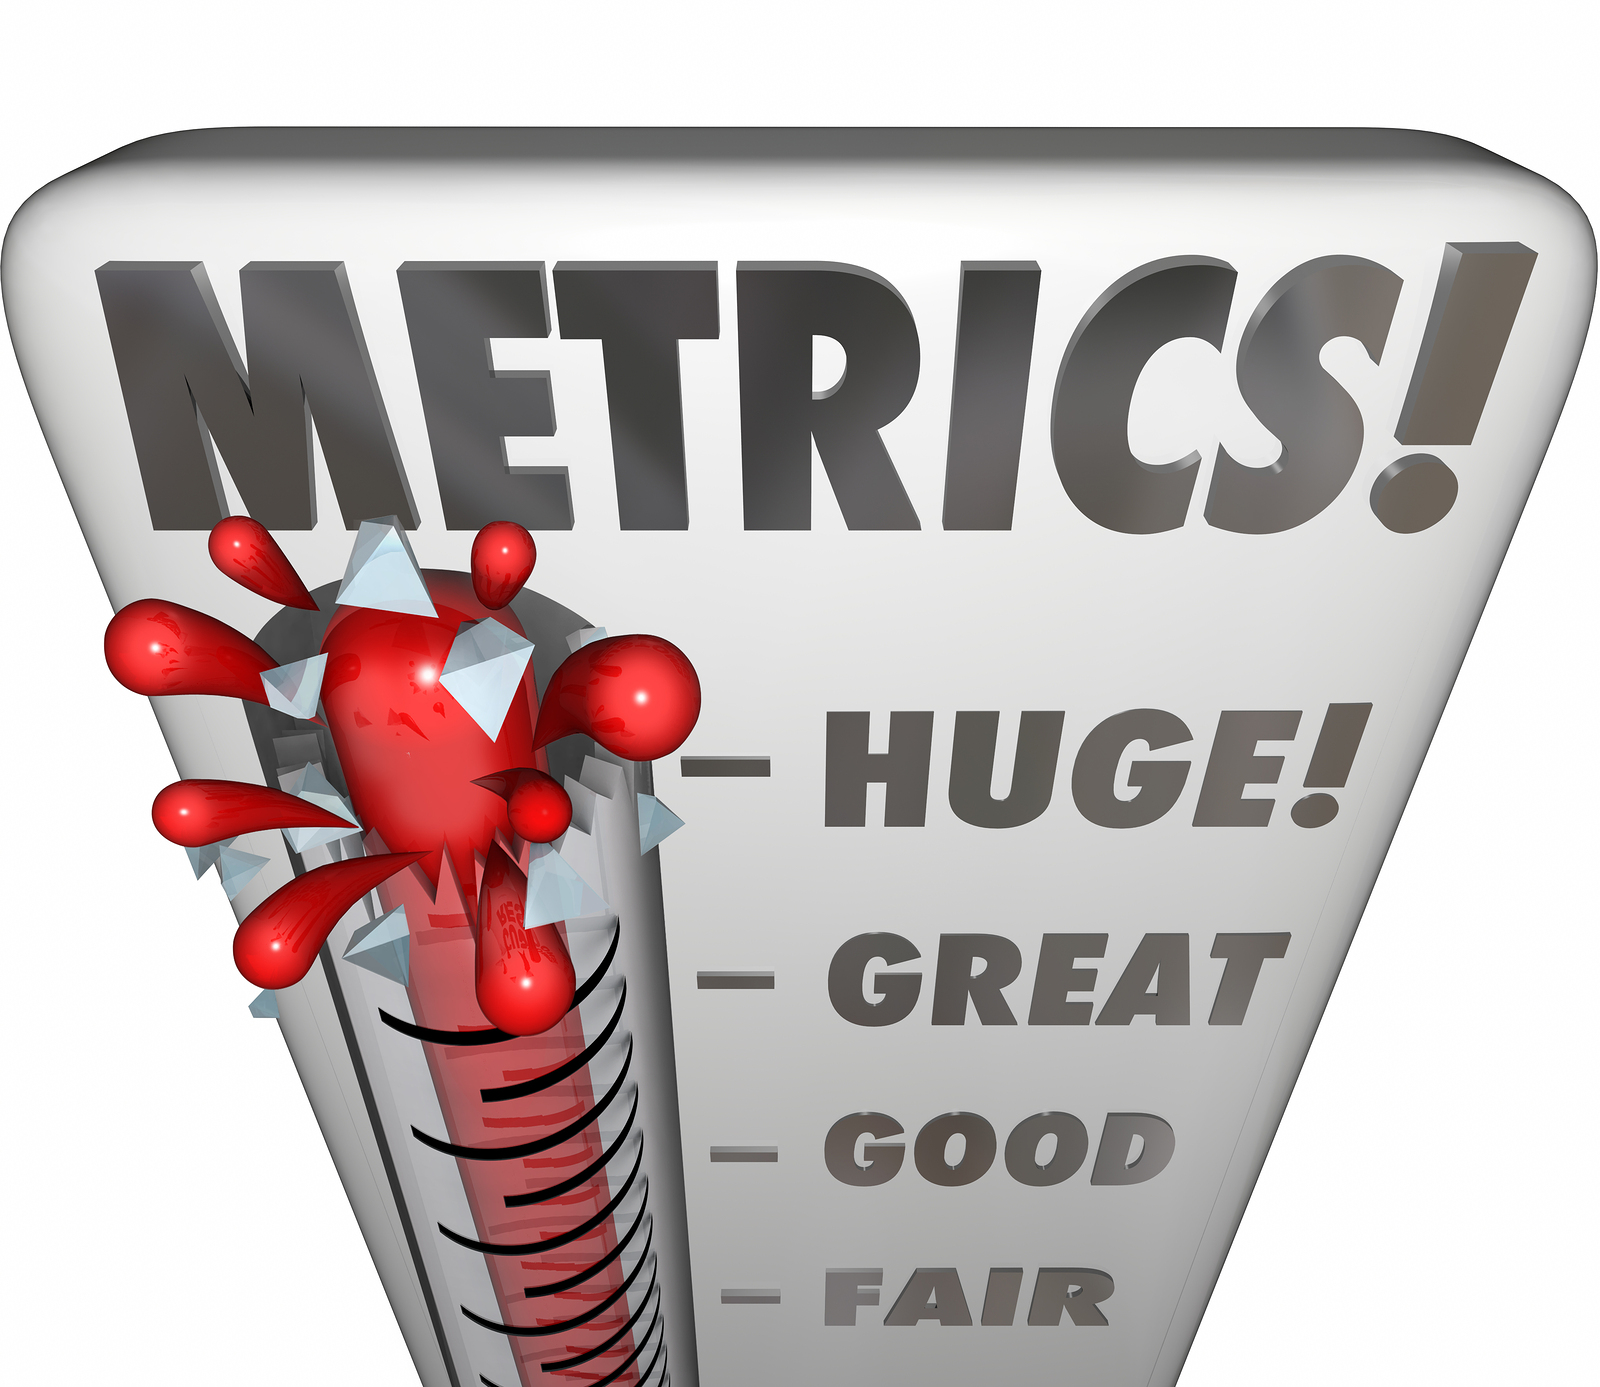 What Are Some Common Recruiting Metrics